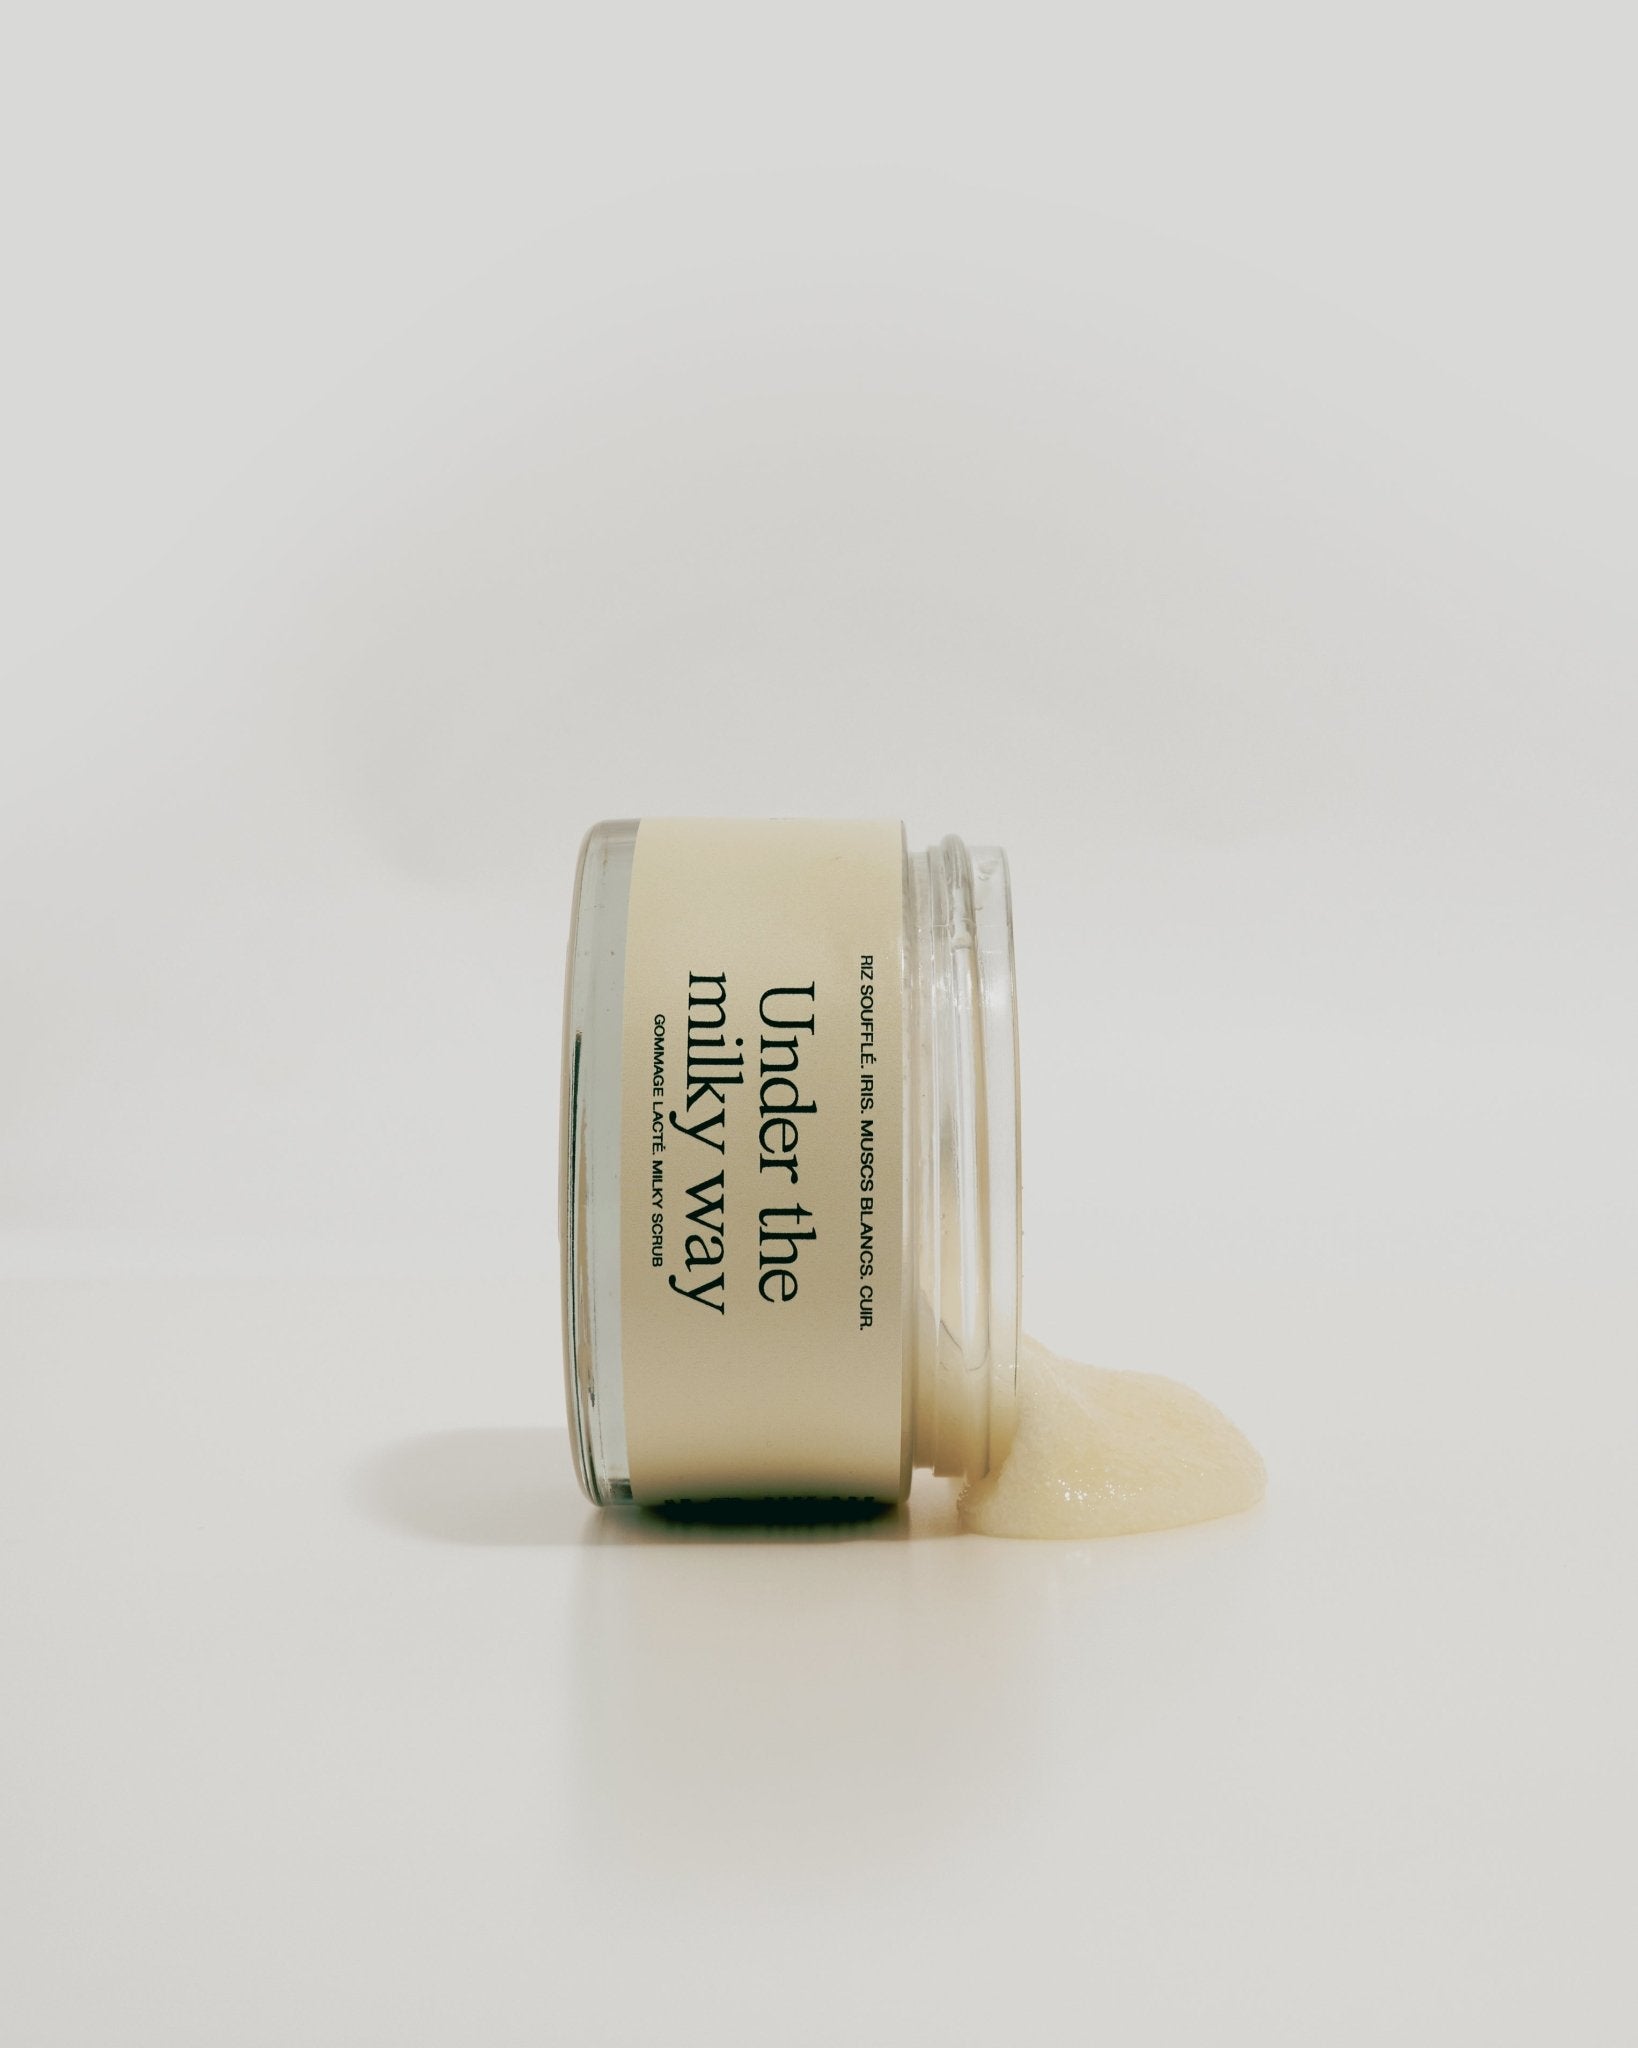 Gommage lacté Under the Milky Way - REFEEL NATURALS - Boutique We Are Paris